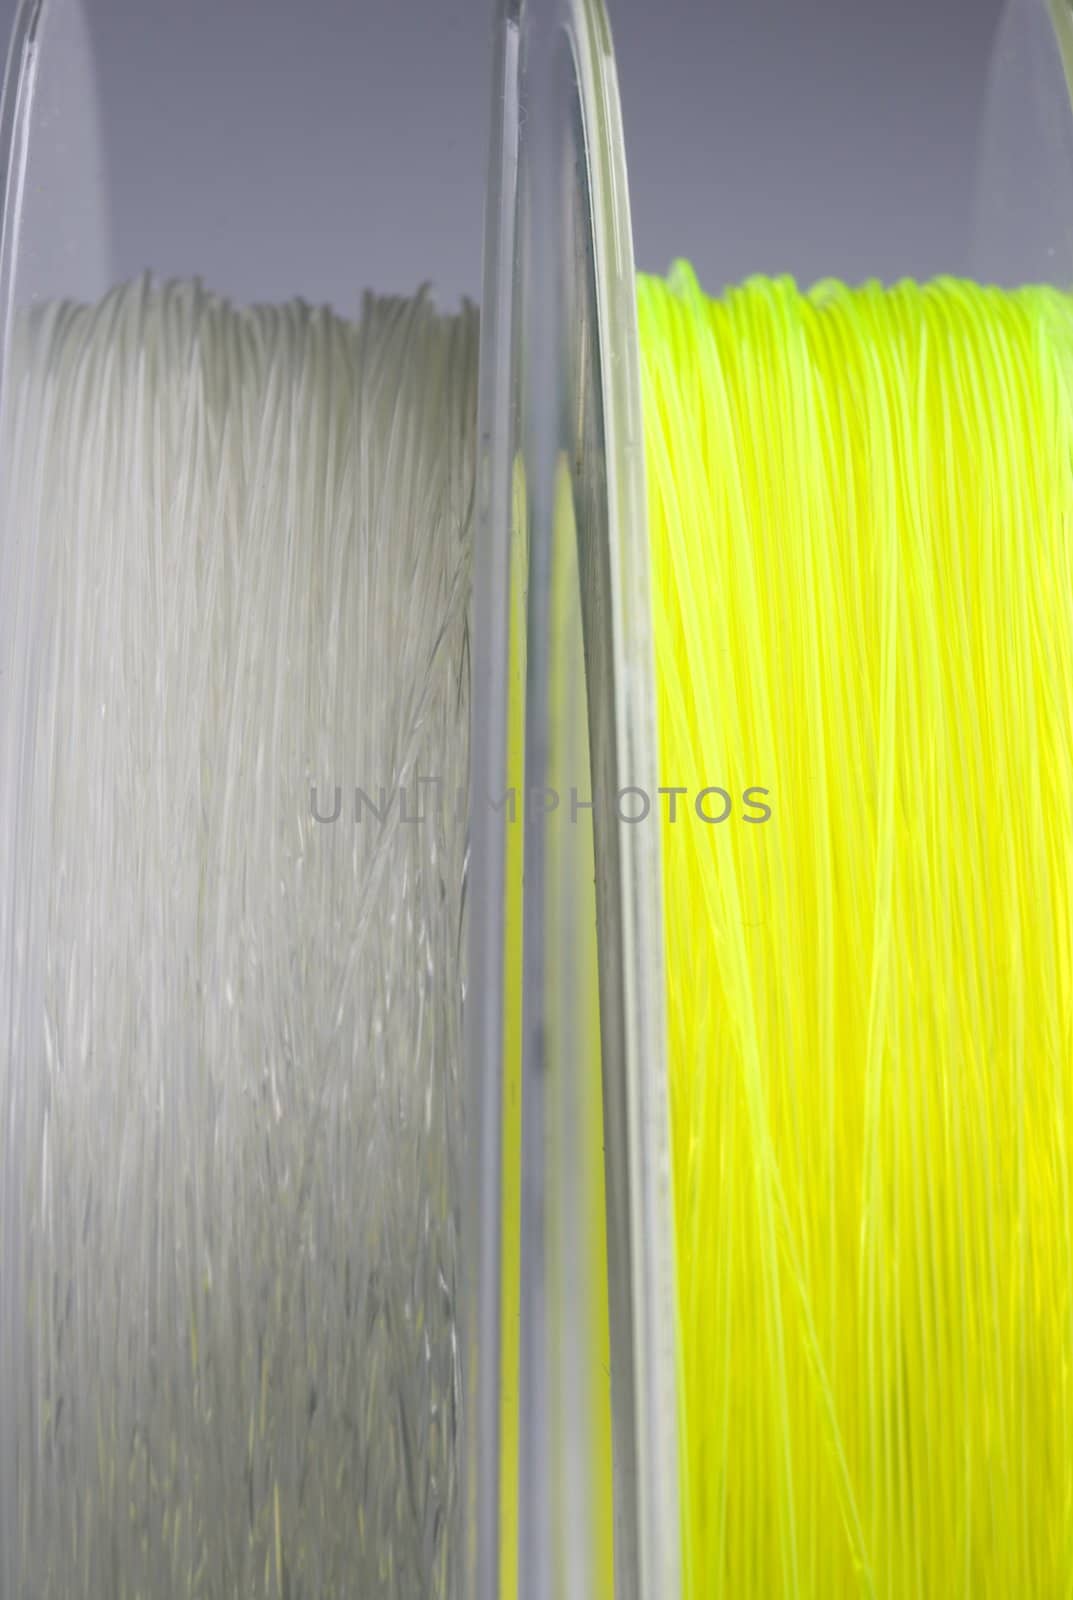 nylon line used for sport fishing in saltwater